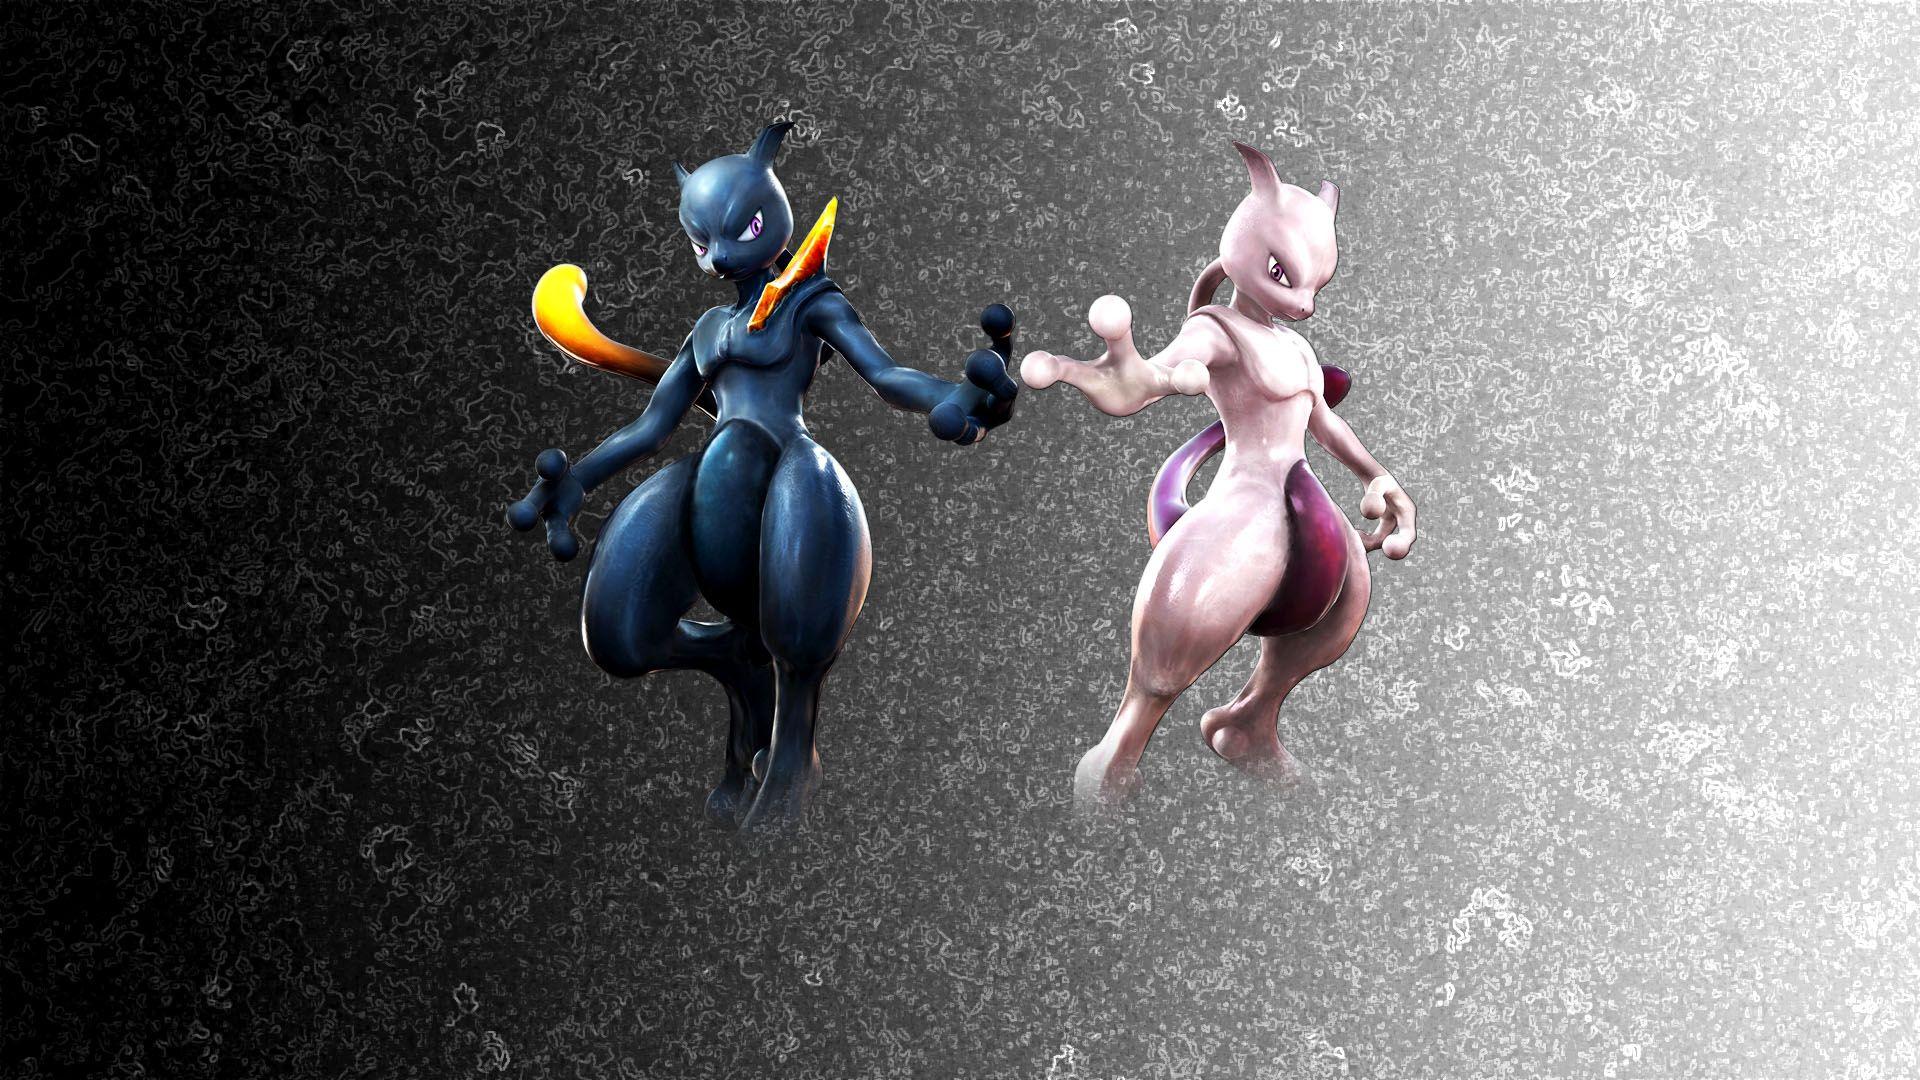 Pokemon HD Mewtwo Wallpapers 69 images